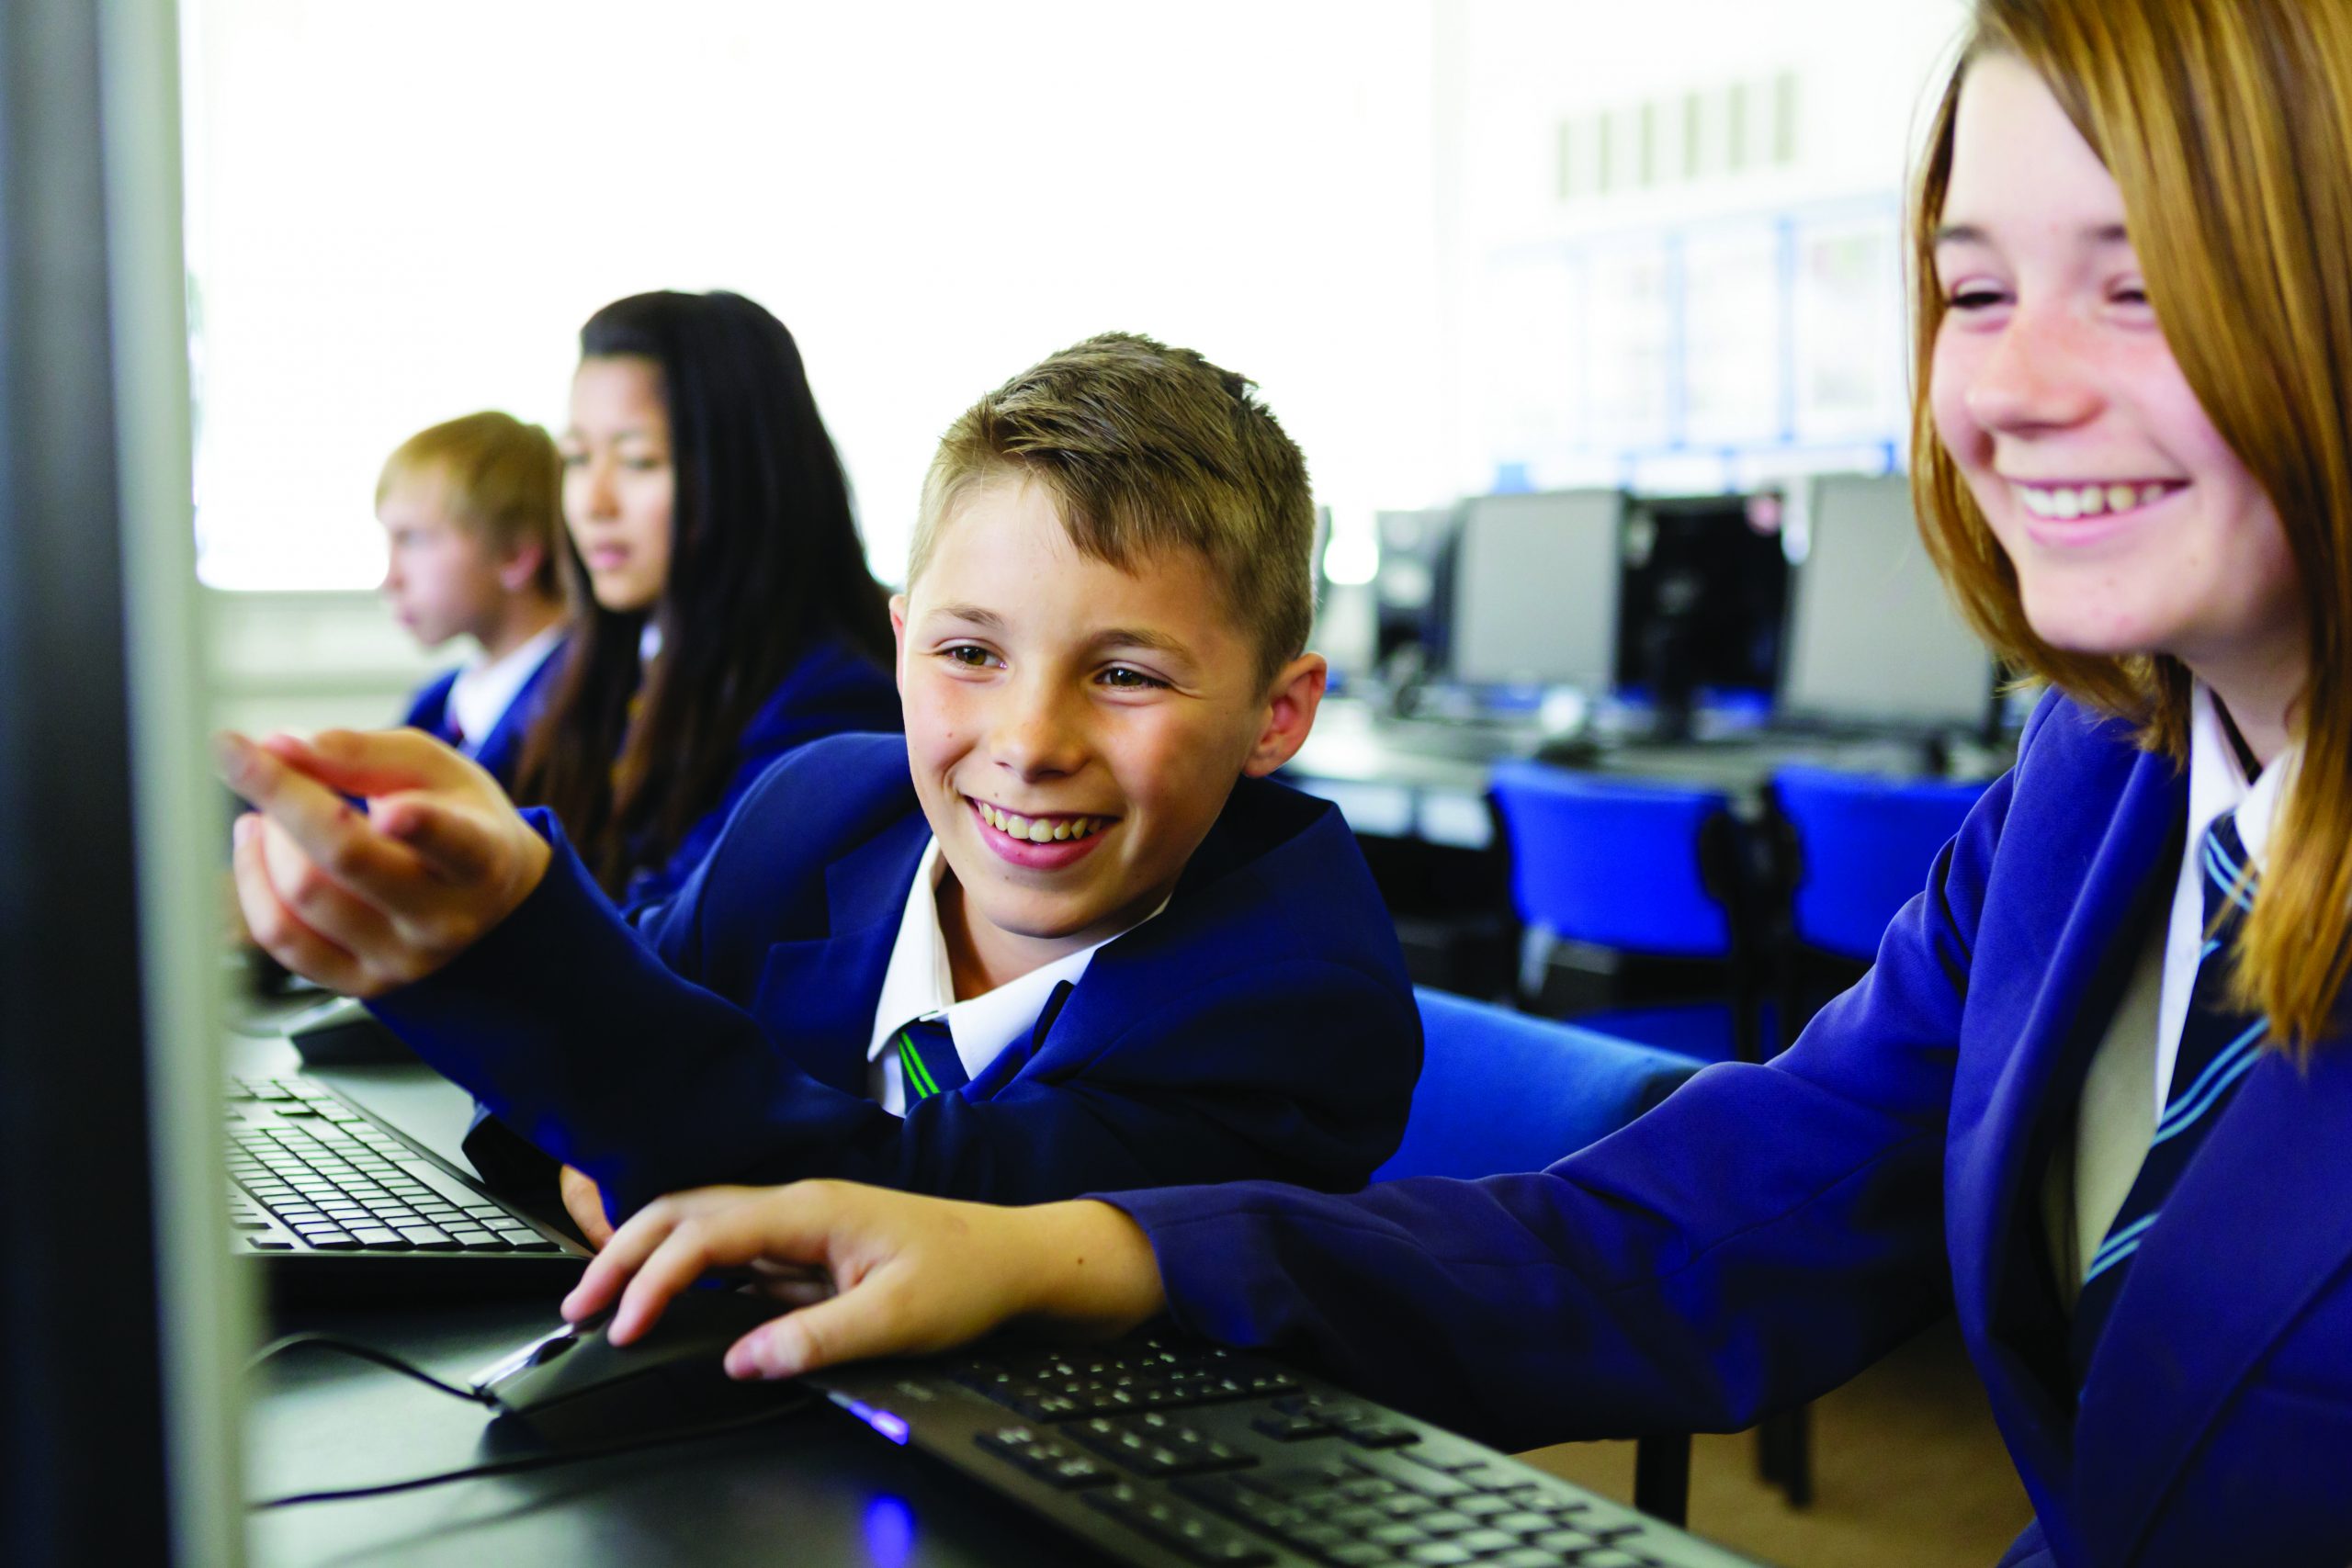 A boy and a girl using a computer. They are smiling and the boy is pointing at the screen